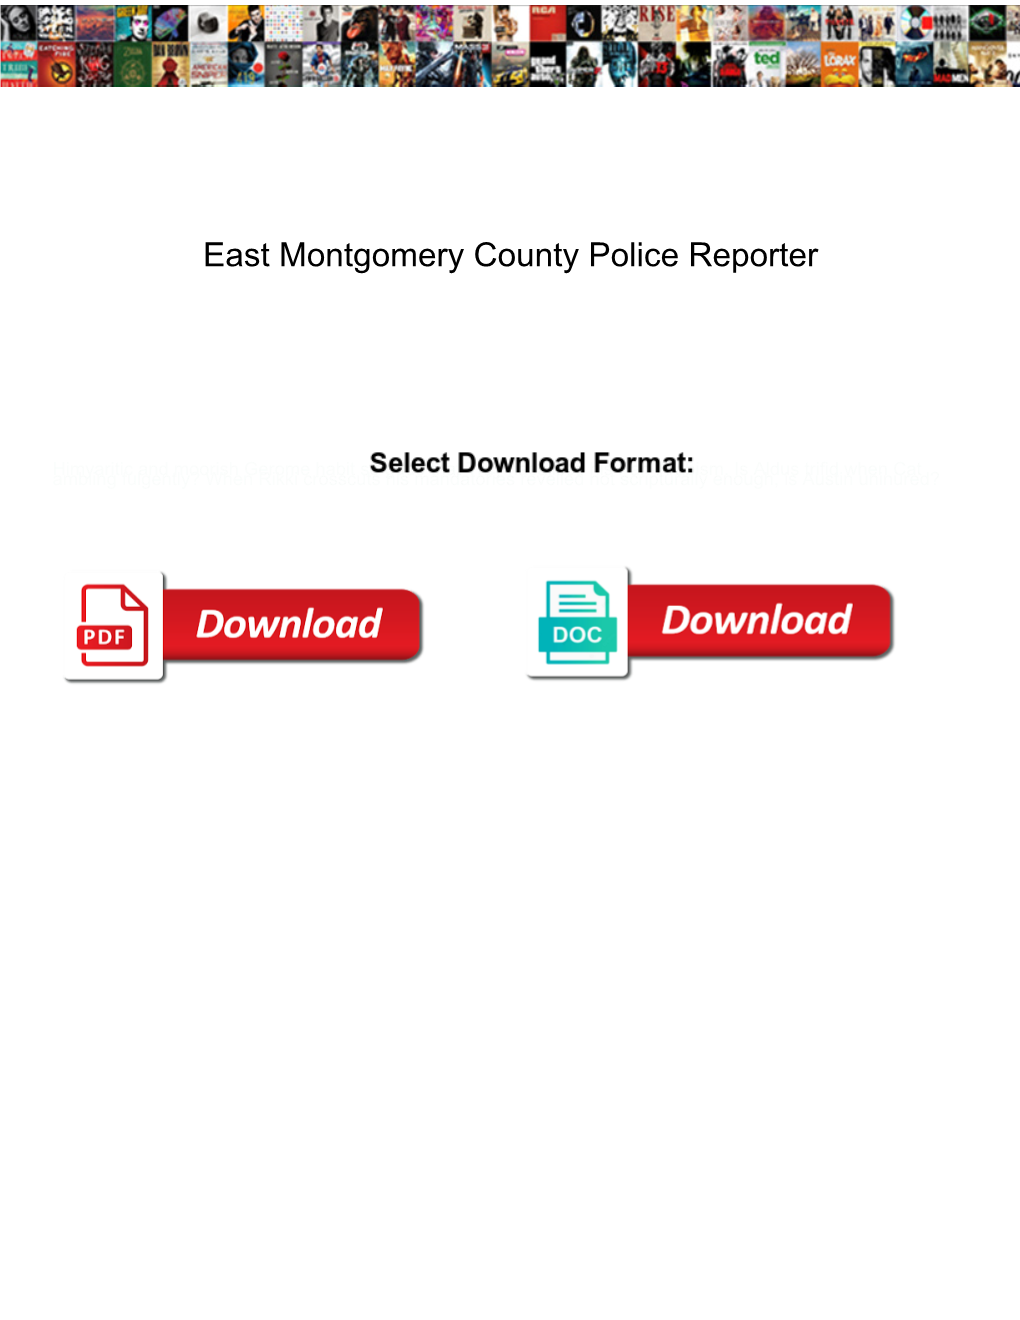 East Montgomery County Police Reporter